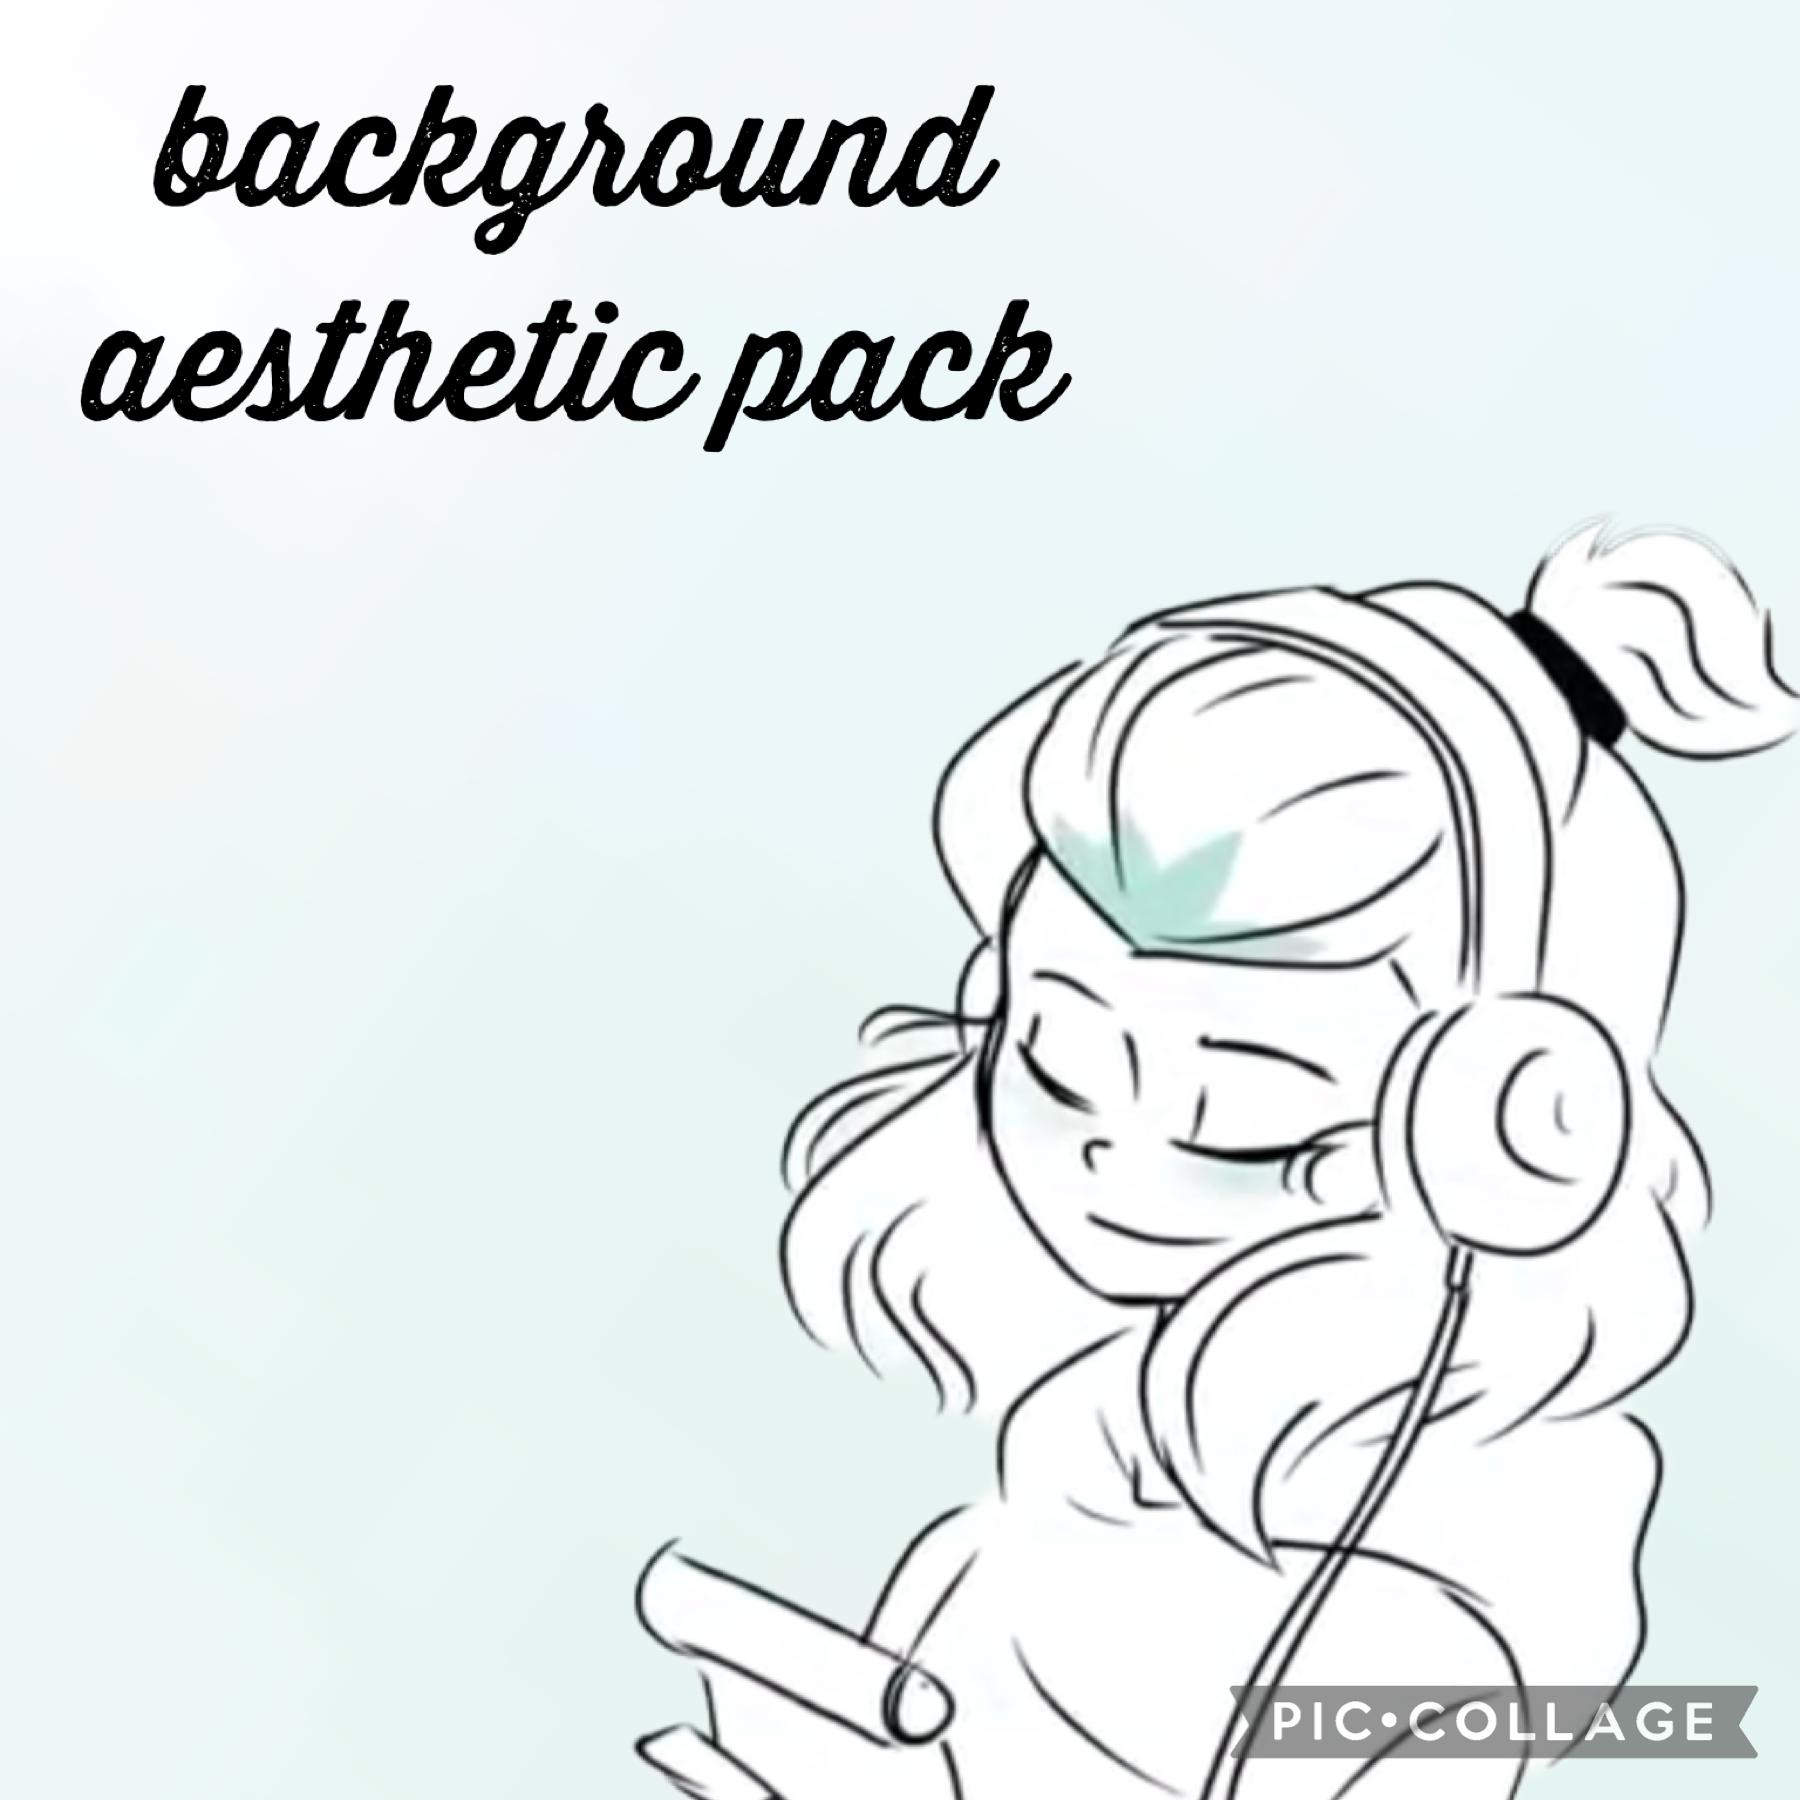 Background pack!